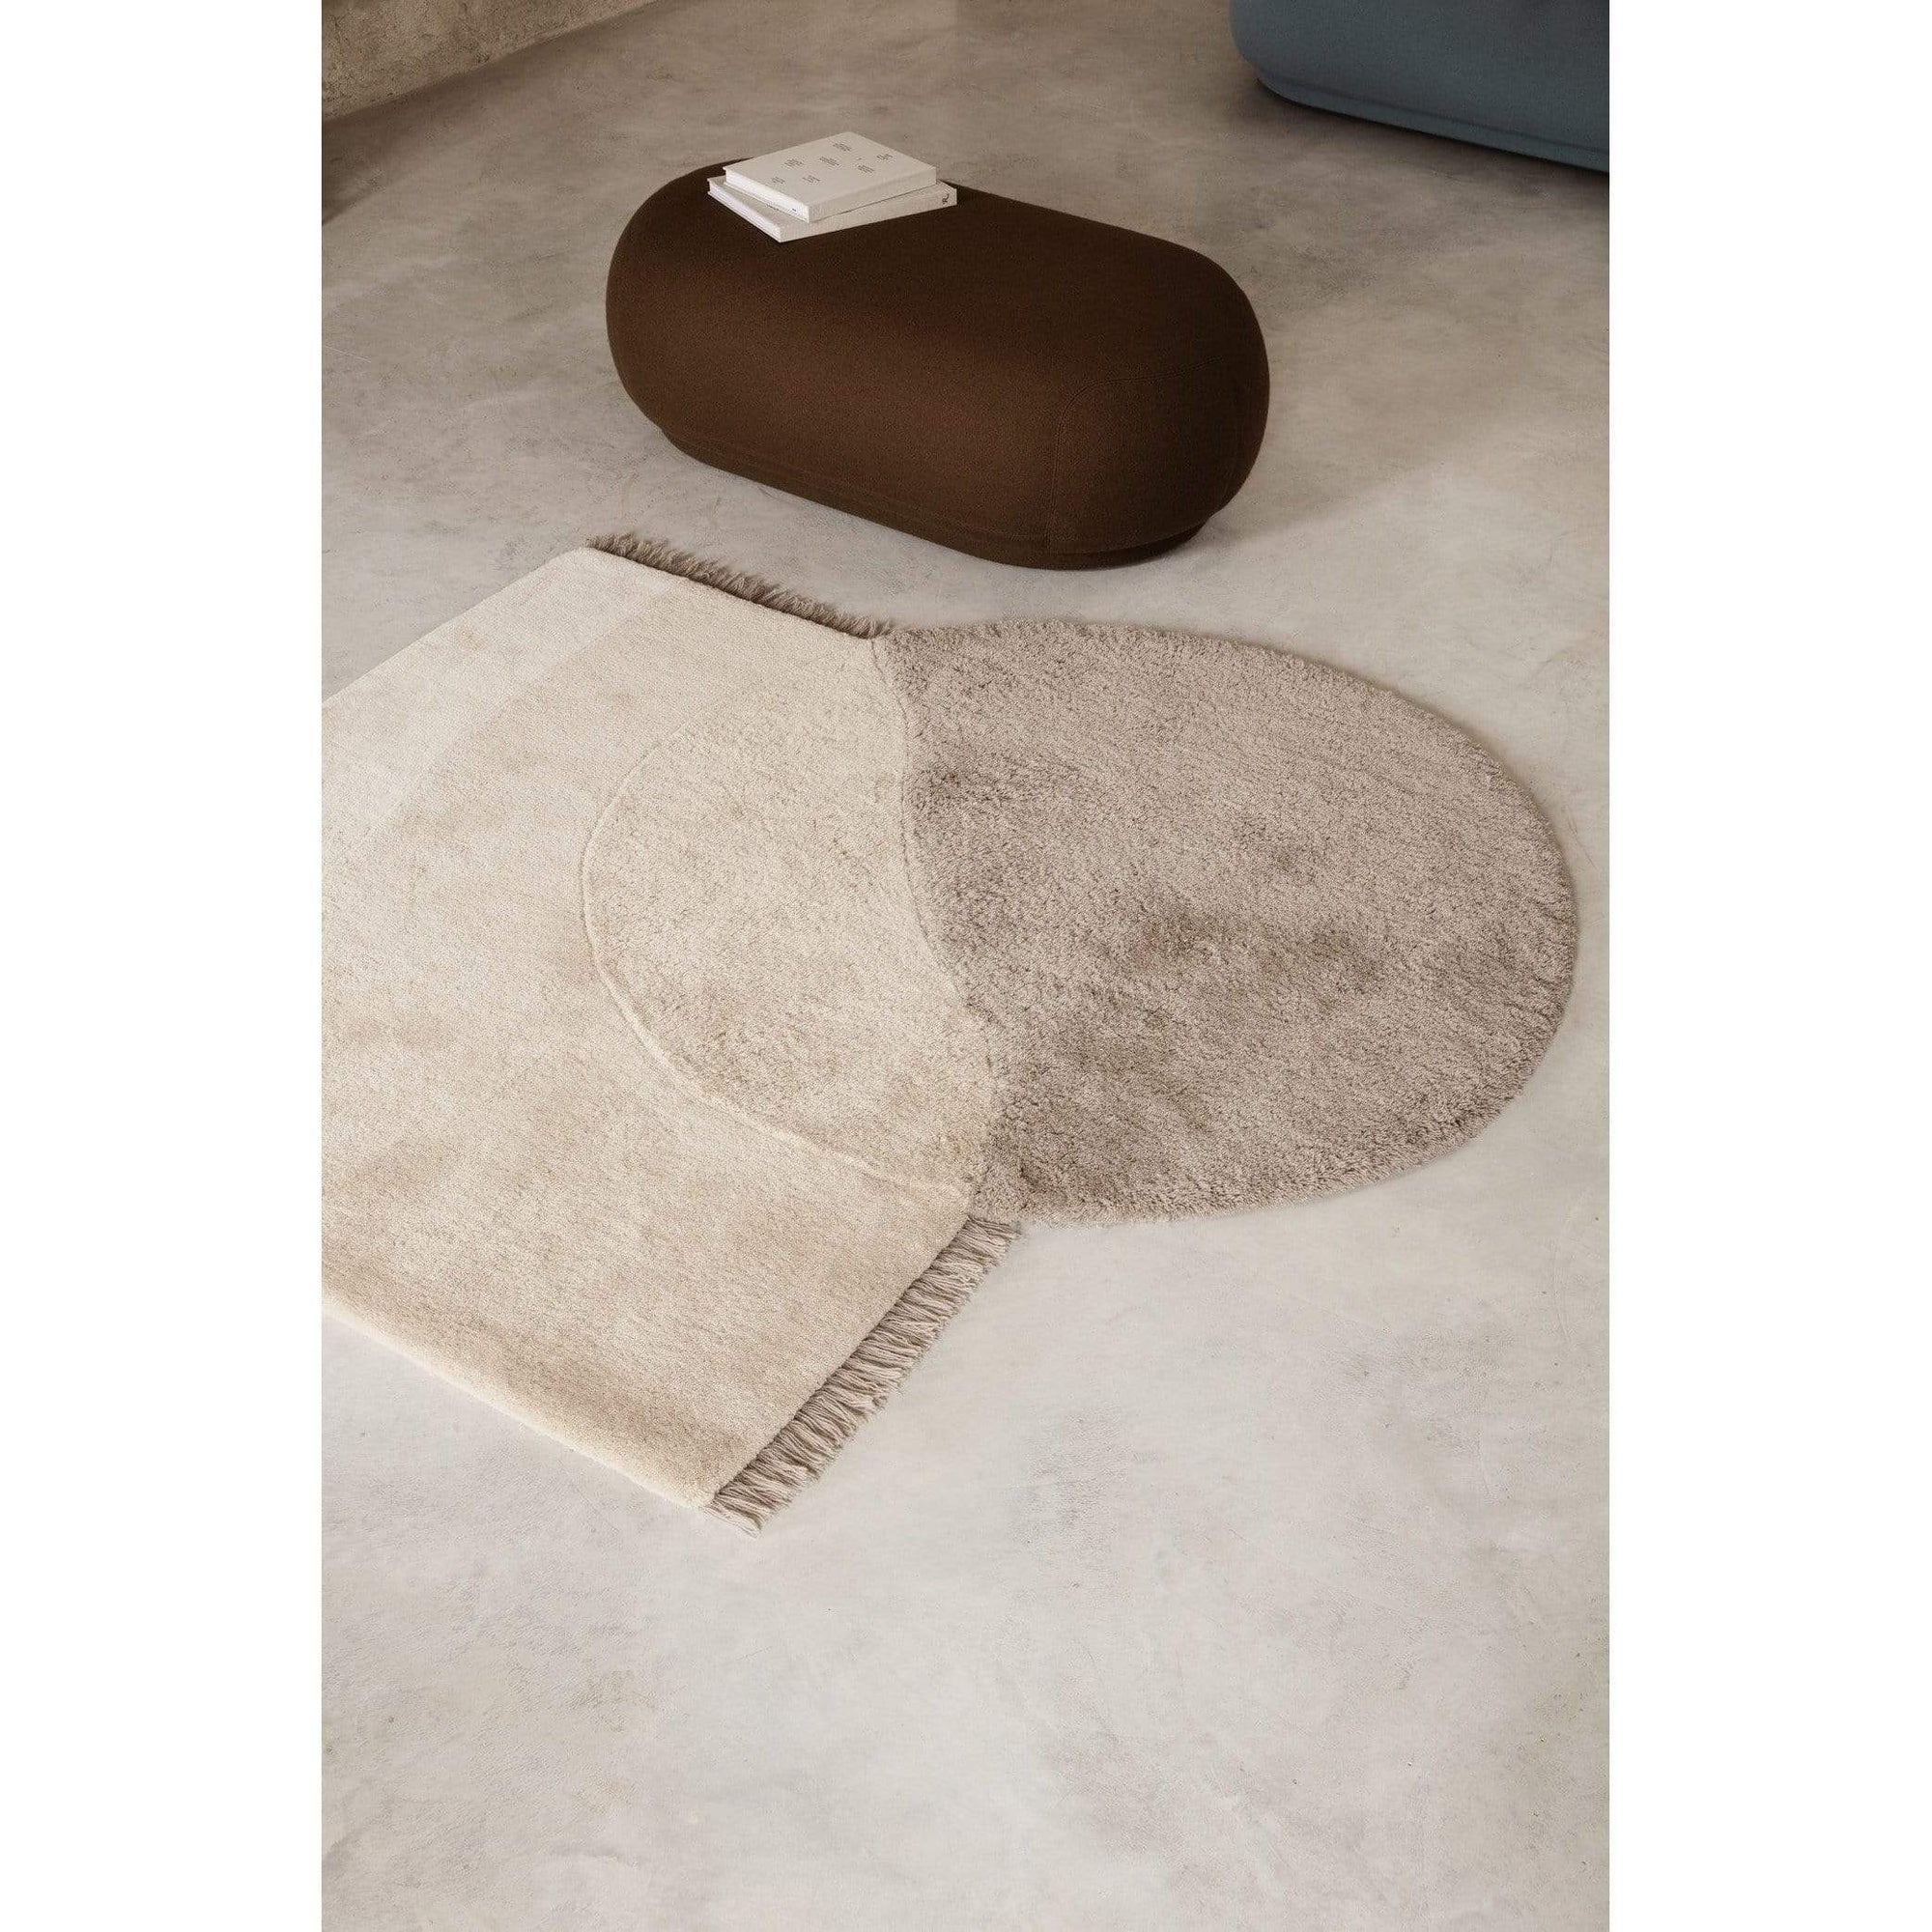 Rugs by Roo | ferm LIVING View Tufted Rug Beige-110084203